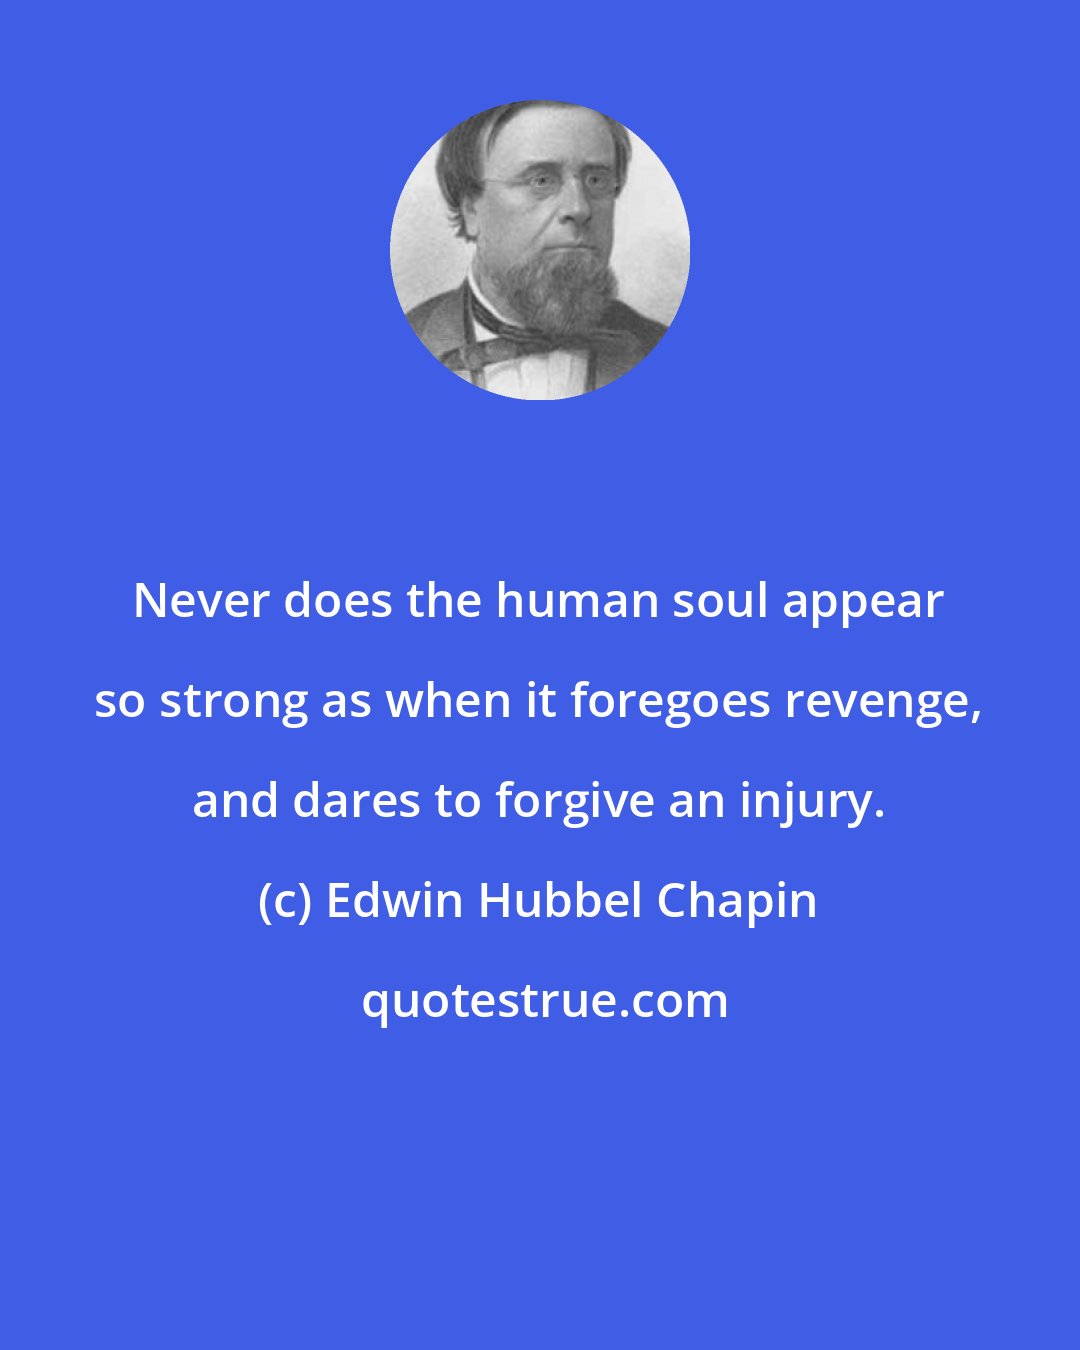 Edwin Hubbel Chapin: Never does the human soul appear so strong as when it foregoes revenge, and dares to forgive an injury.